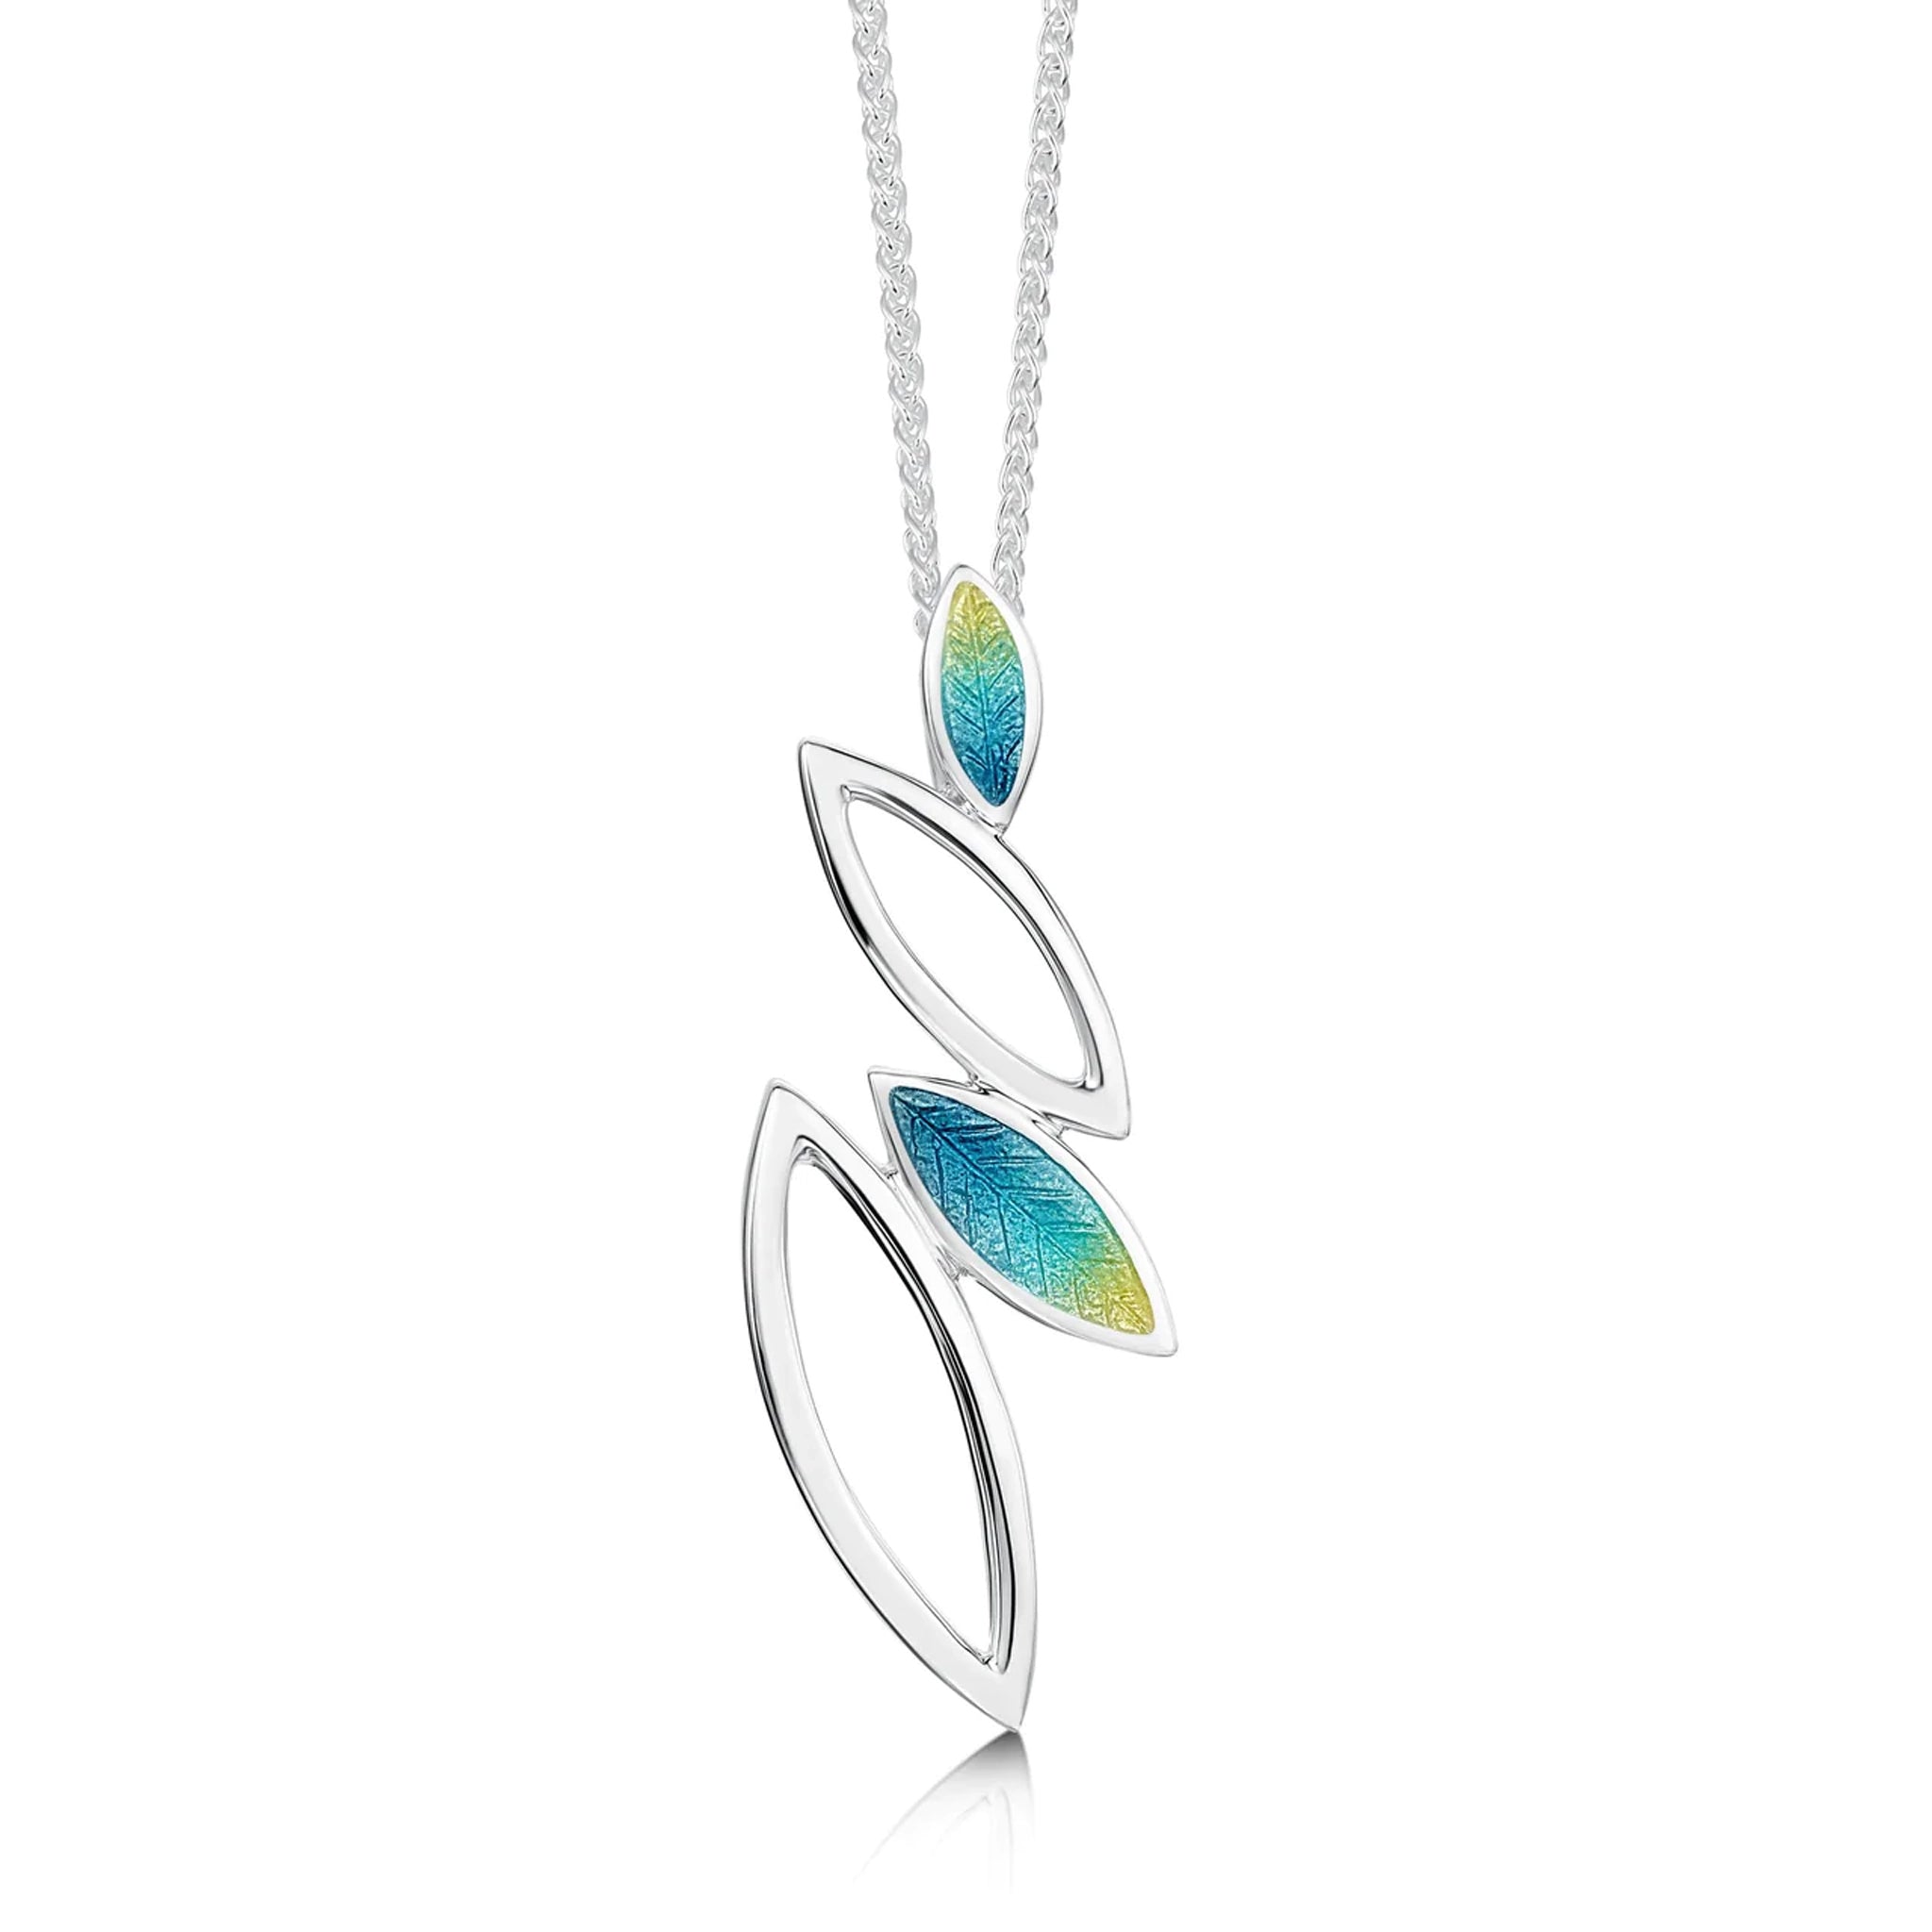 Silver pendant in varying size leaf shapes in blue/green/yellow enamel and silver on silver chain